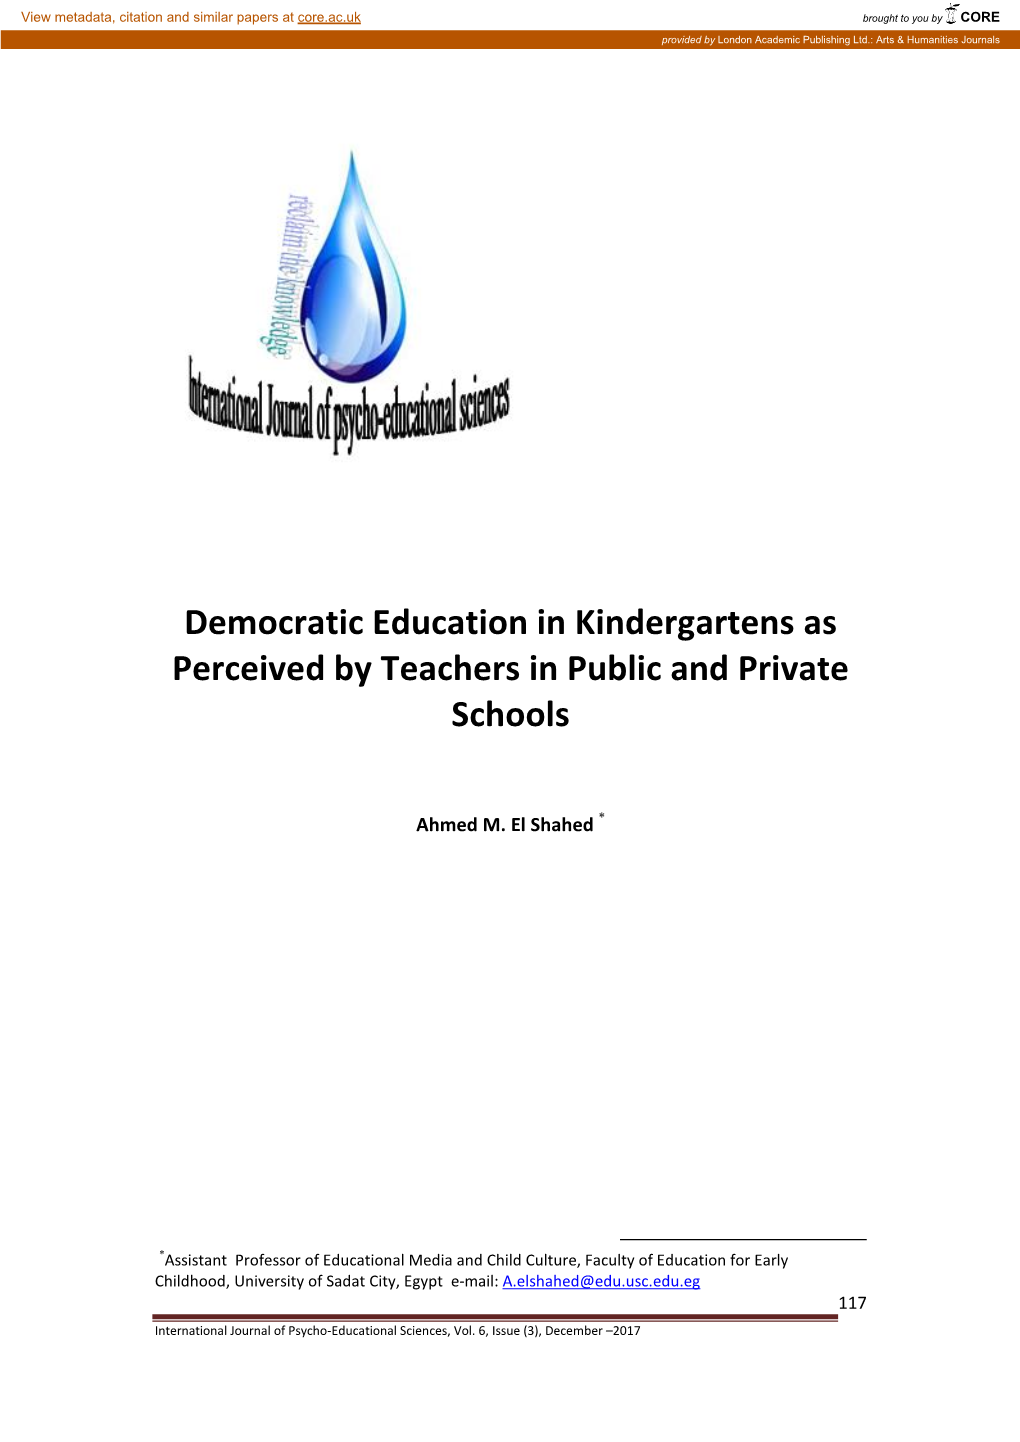 Democratic Education in Kindergartens As Perceived by Teachers in Public and Private Schools